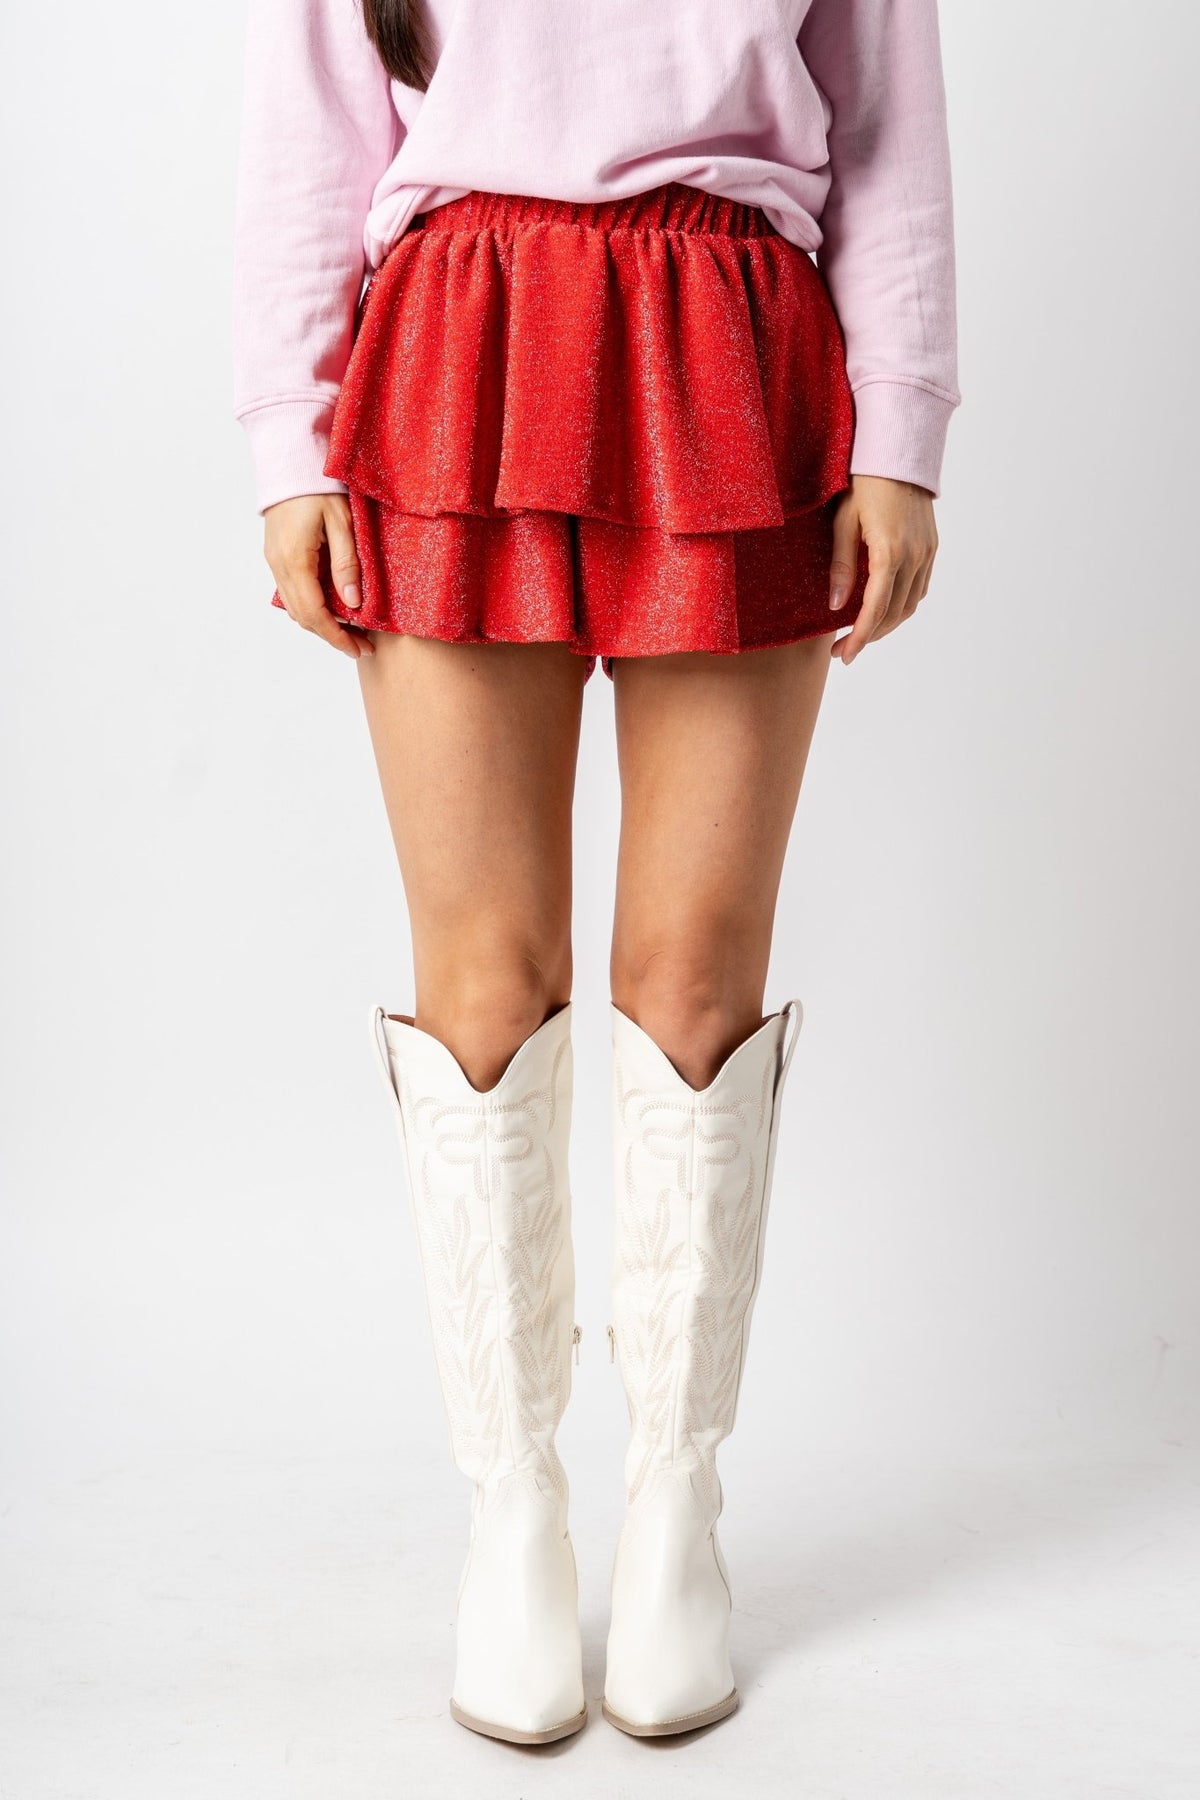 Shiny knit layered skort red - Trendy Holiday Apparel at Lush Fashion Lounge Boutique in Oklahoma City